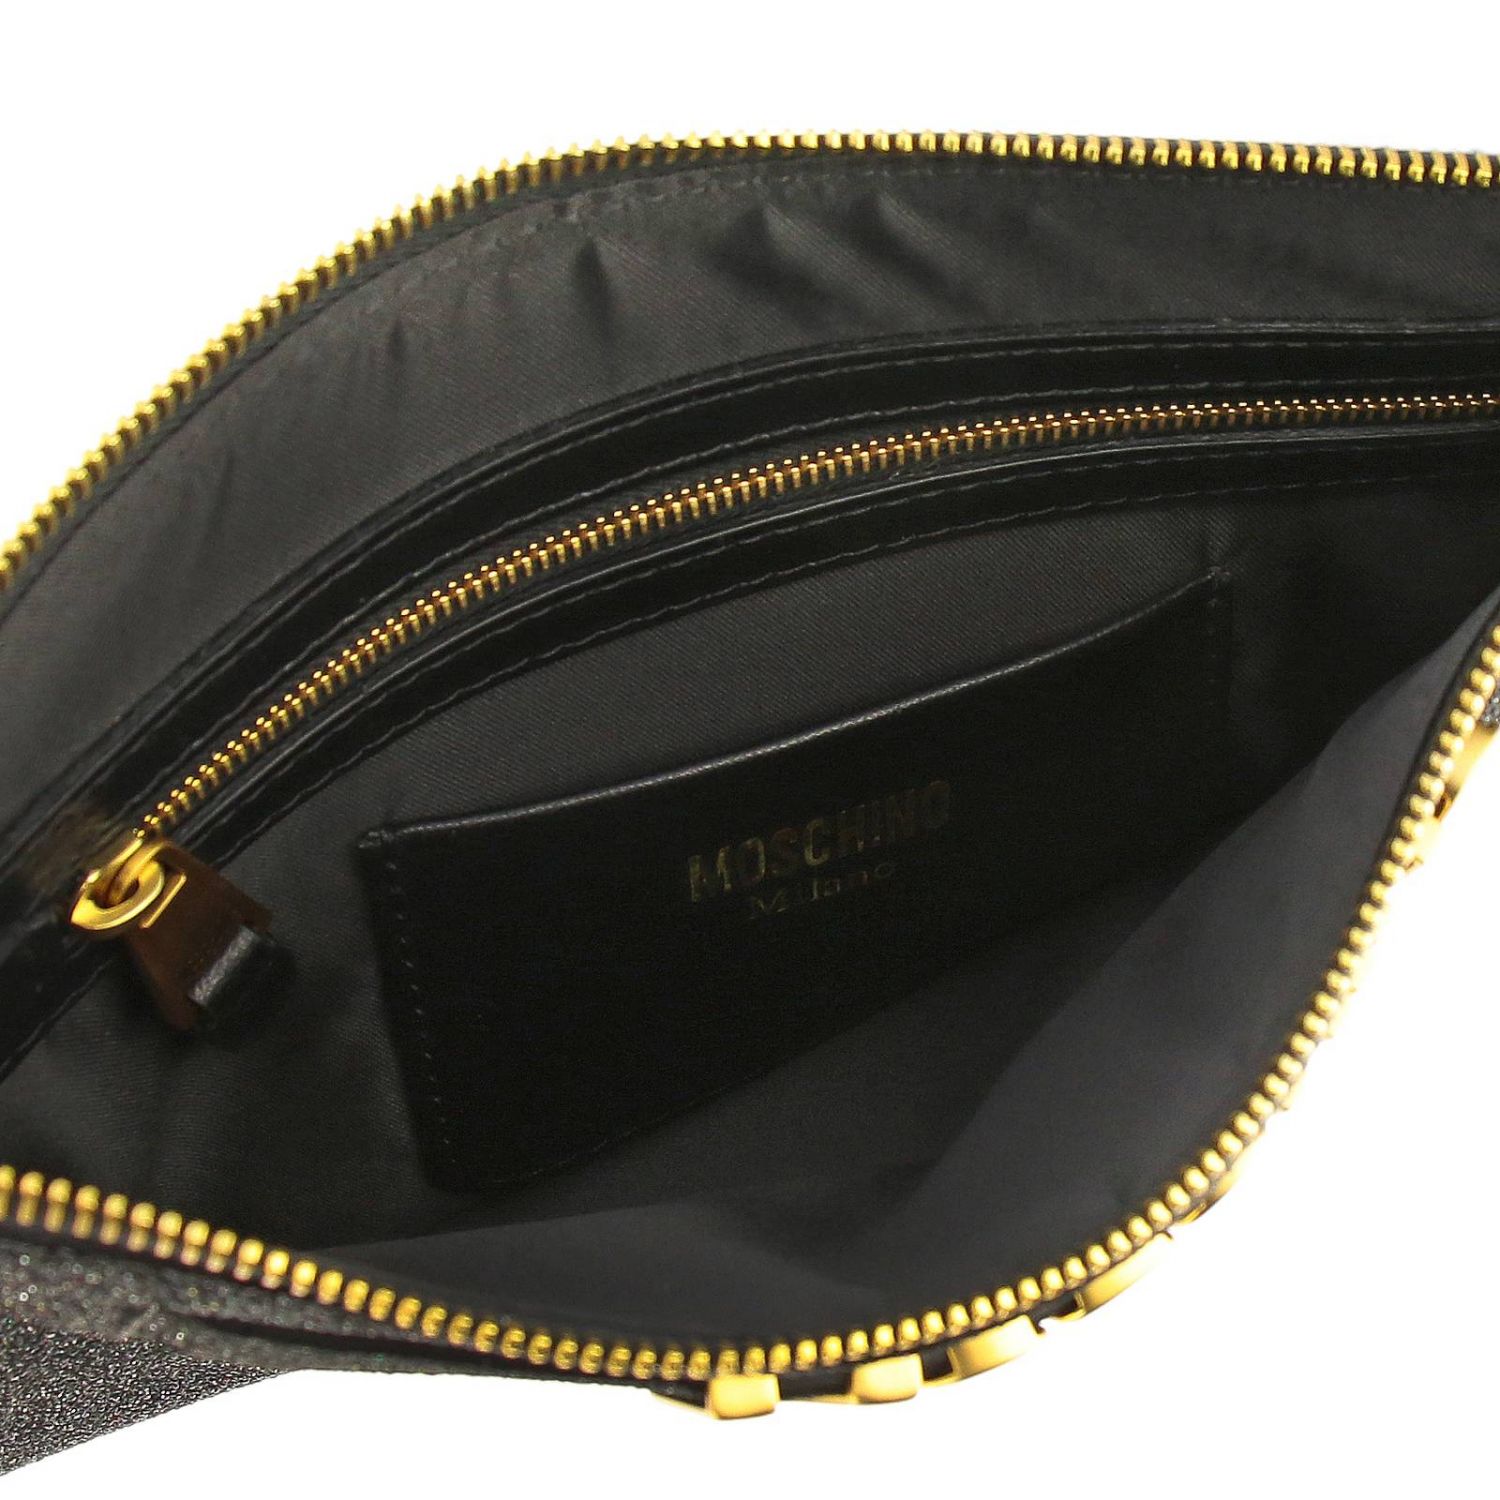 Boutique Moschino Outlet: clutches & pouches for woman - Black ...